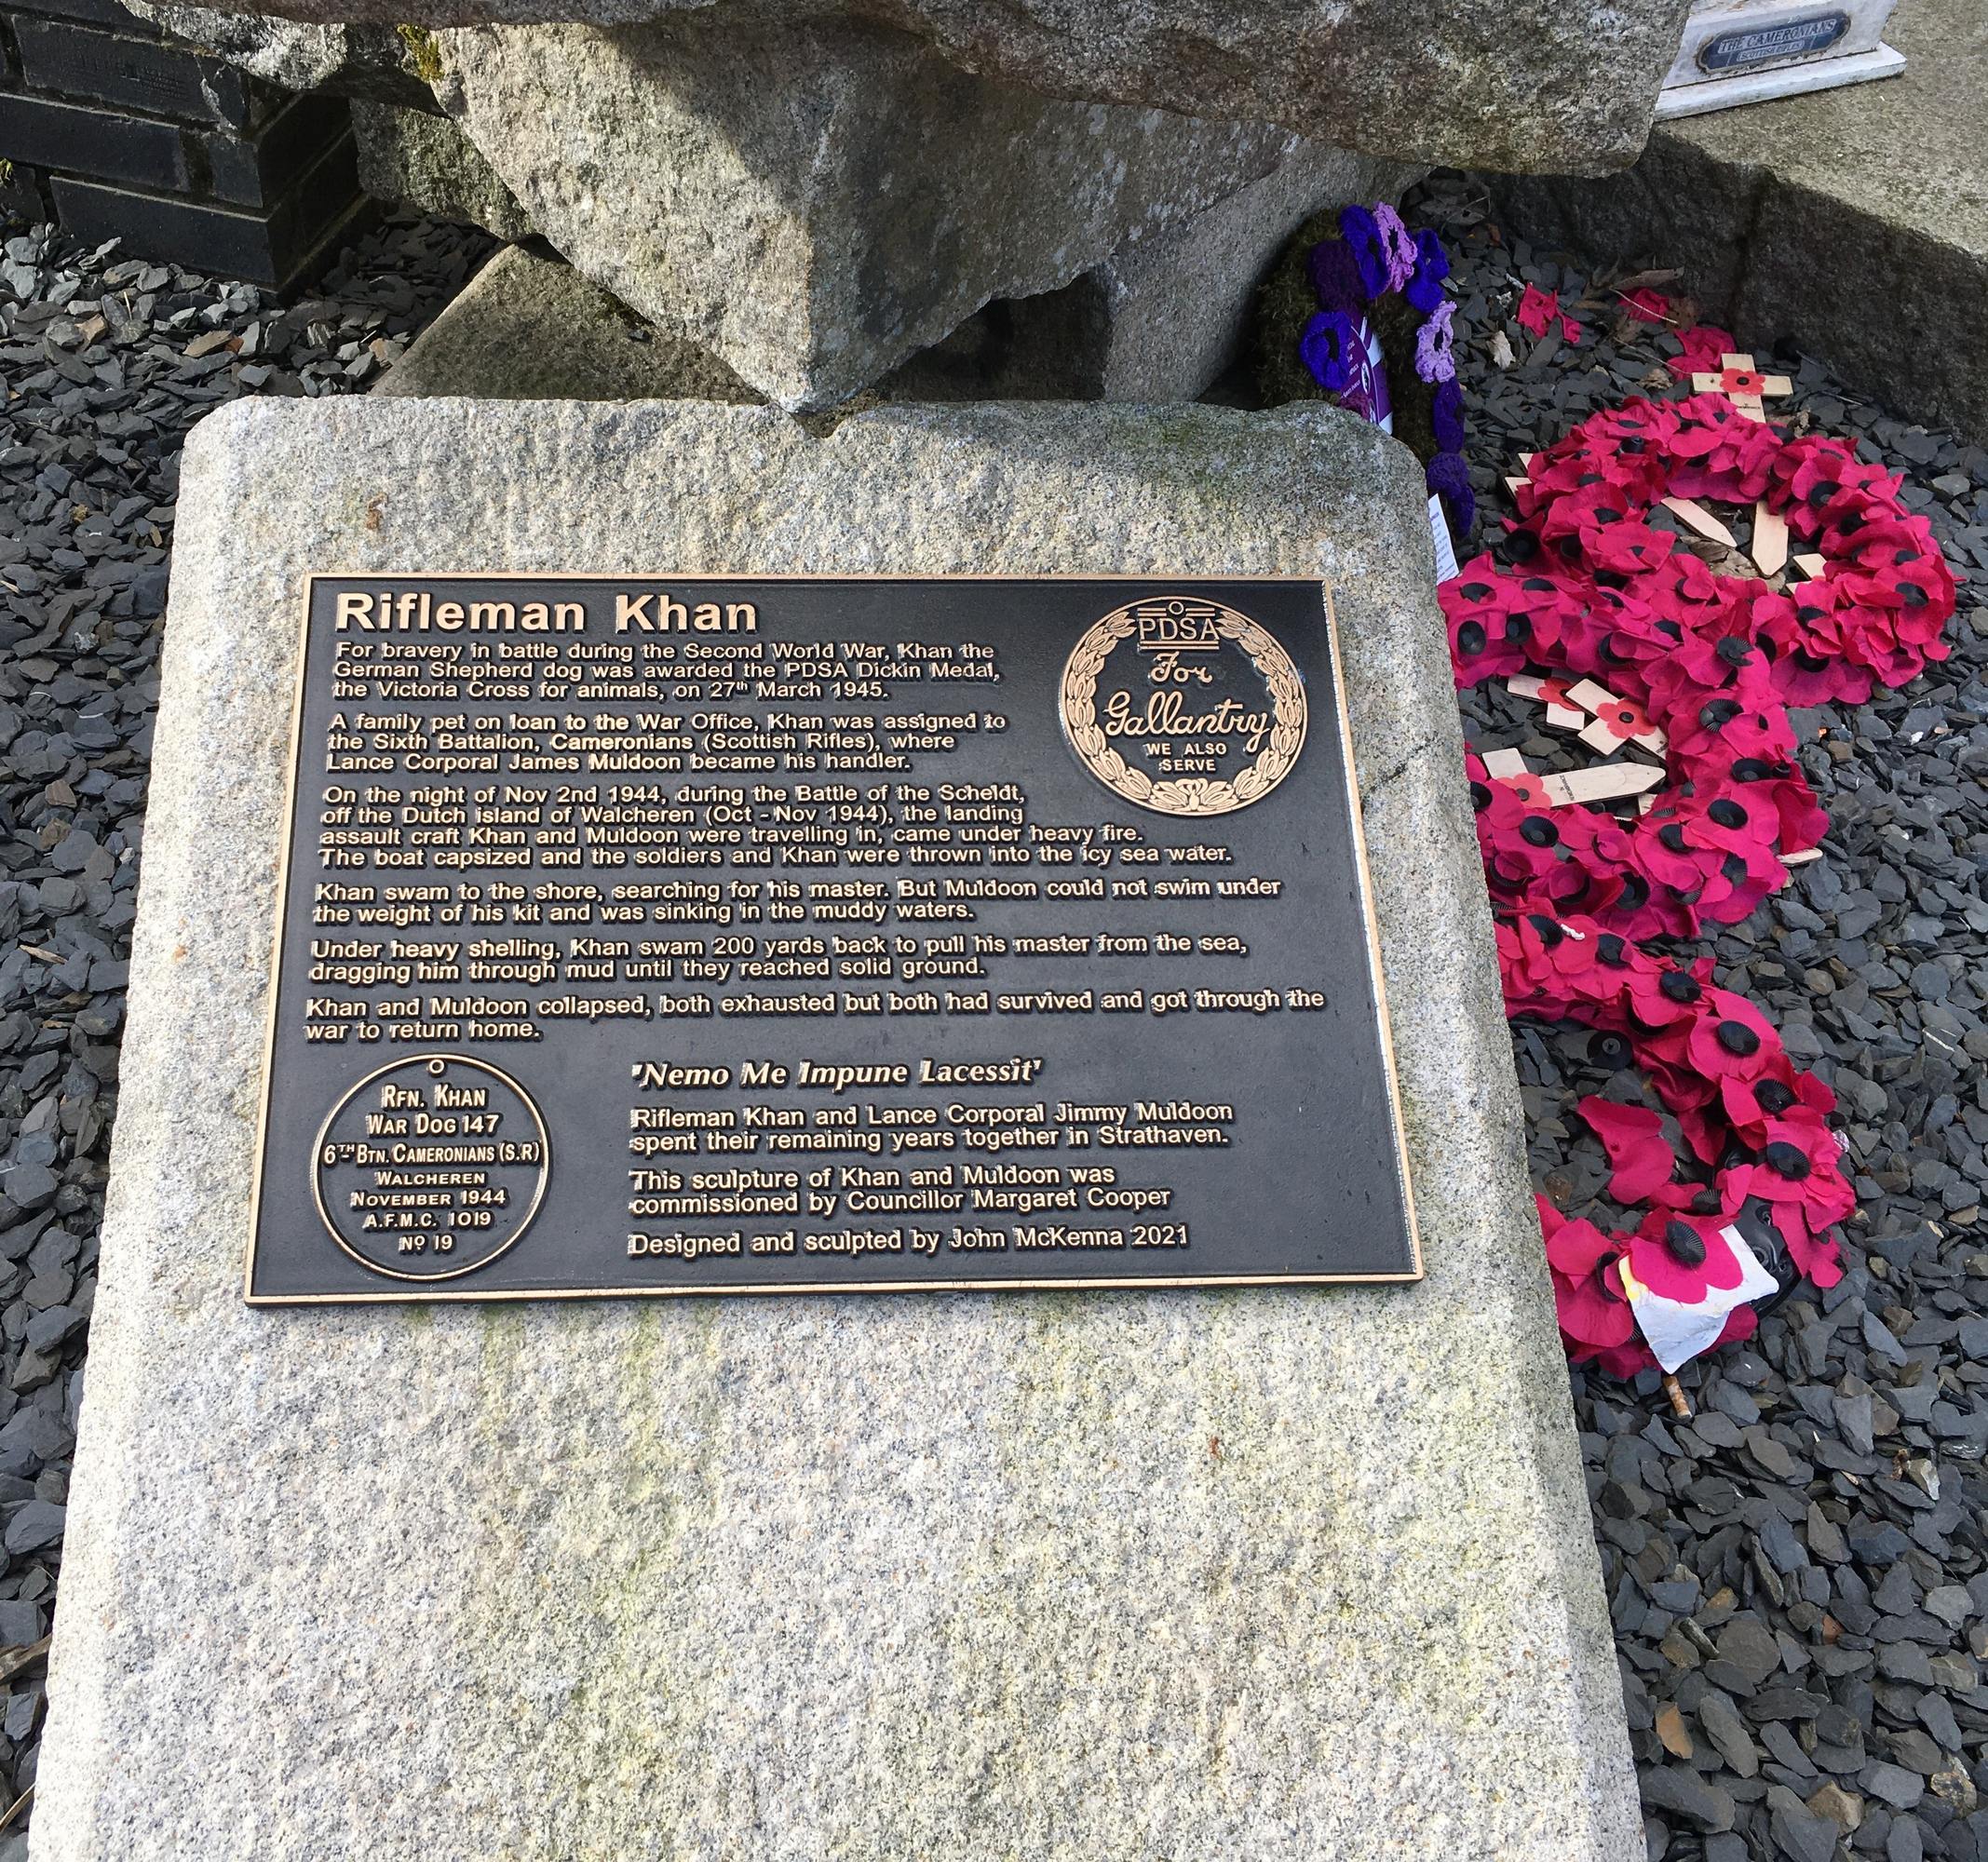  plaque on bronze statue of Khan, a German Shepherd, and L/Cpl Jimmy Muldoon